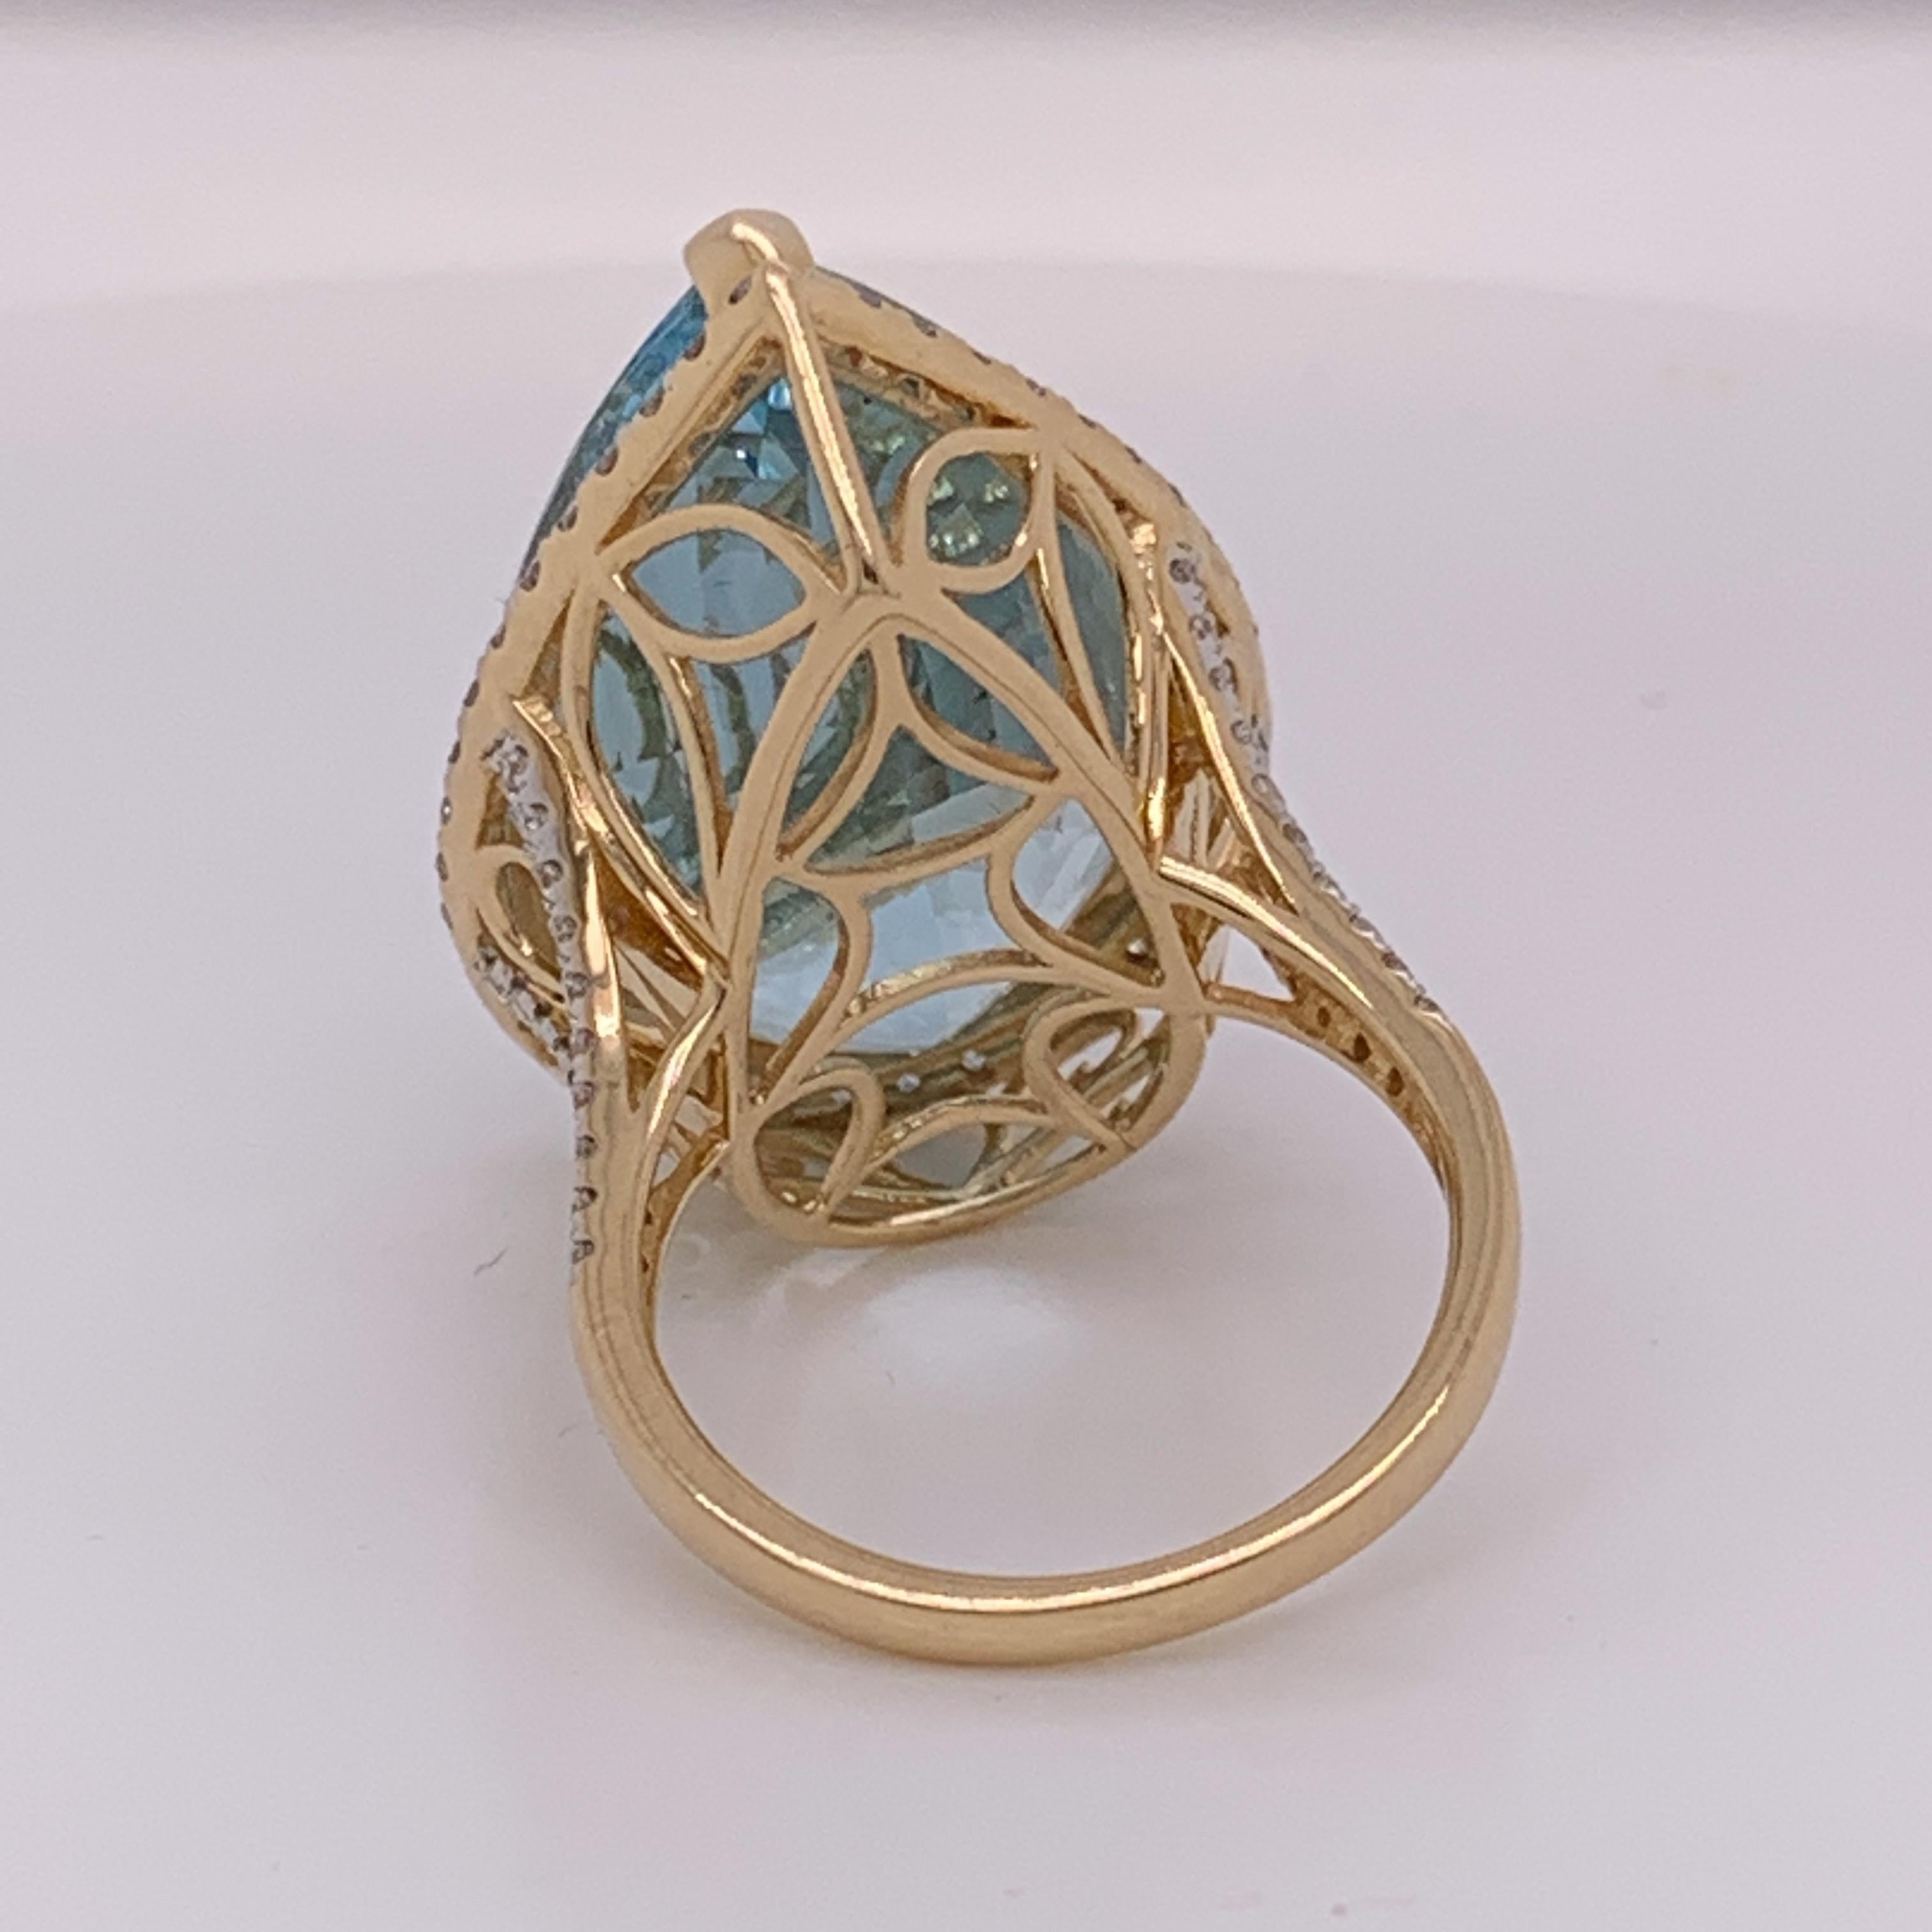 Natural Pears shape 26.71 Aquamarine and 0.90 Carat White diamonds set in 14 Karat yellow gold is one of a kind handcrafted Ring. The ring is currently size 7 . If needed the ring can be resized.
The stone is clean with out inclusion and very good